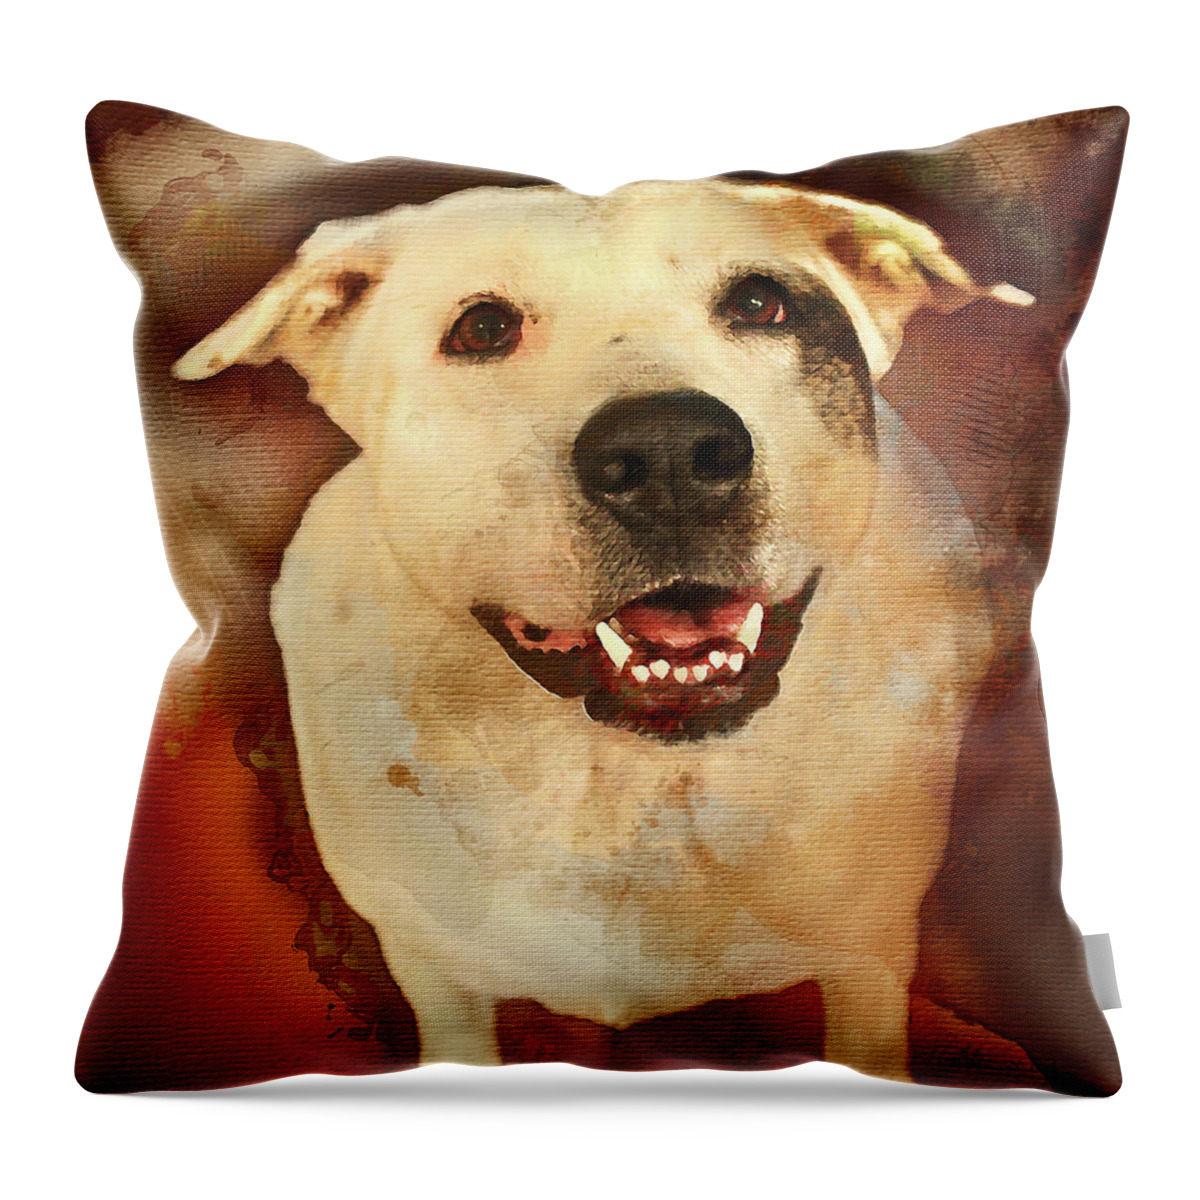 Good Dog Throw Pillow featuring the photograph Good Dog by Bellesouth Studio